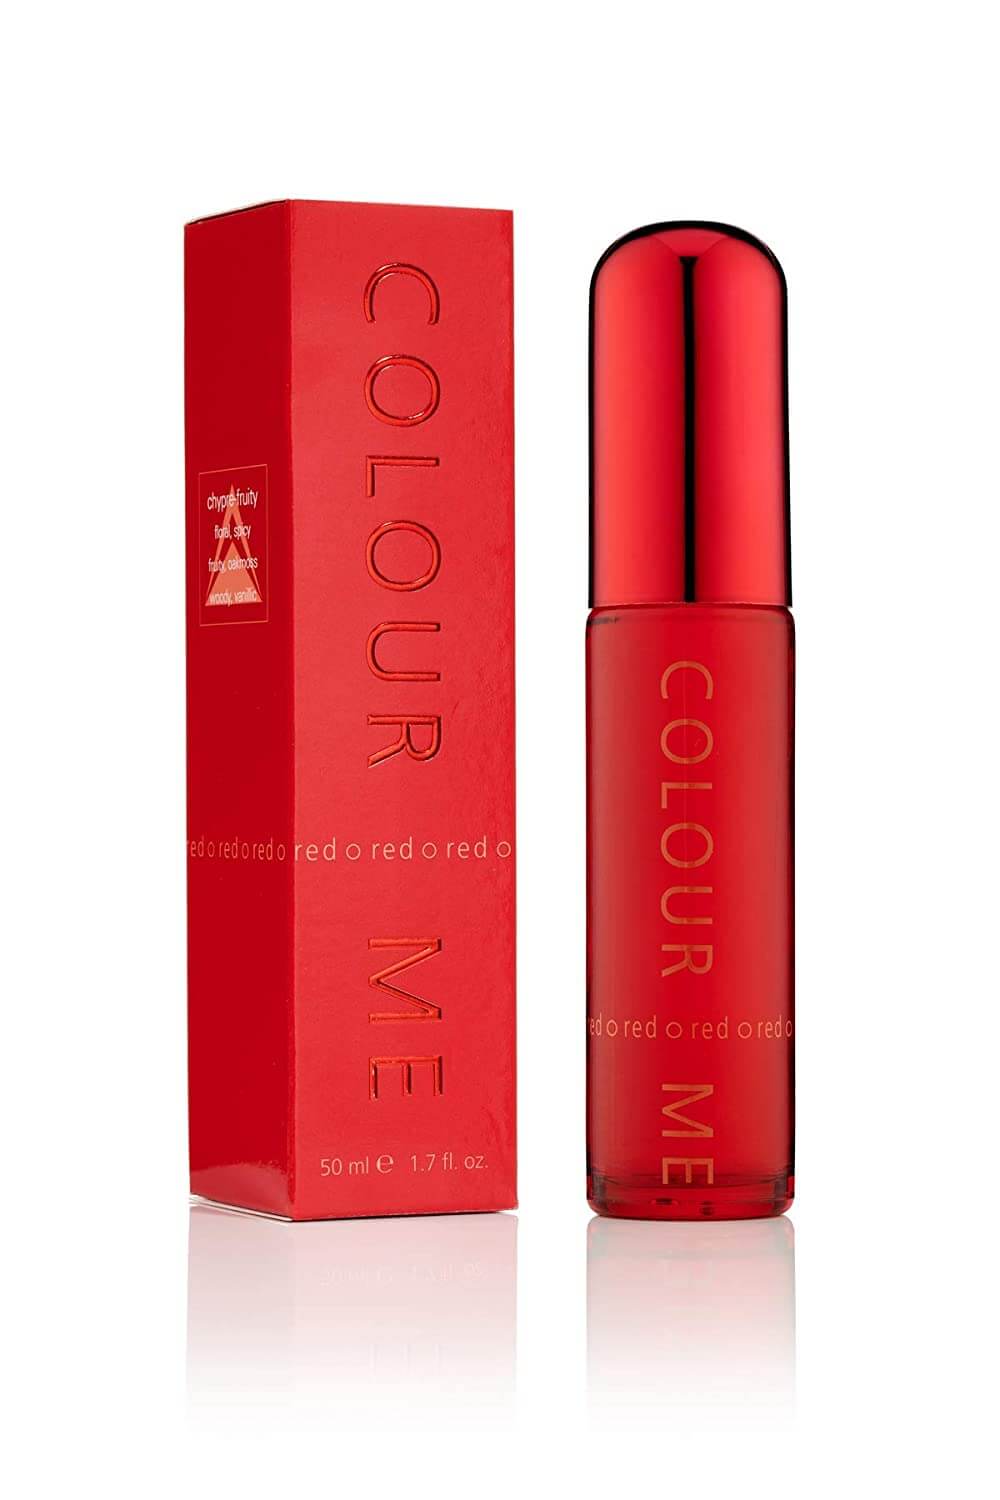 Colour Me Red perfume in Pakistan